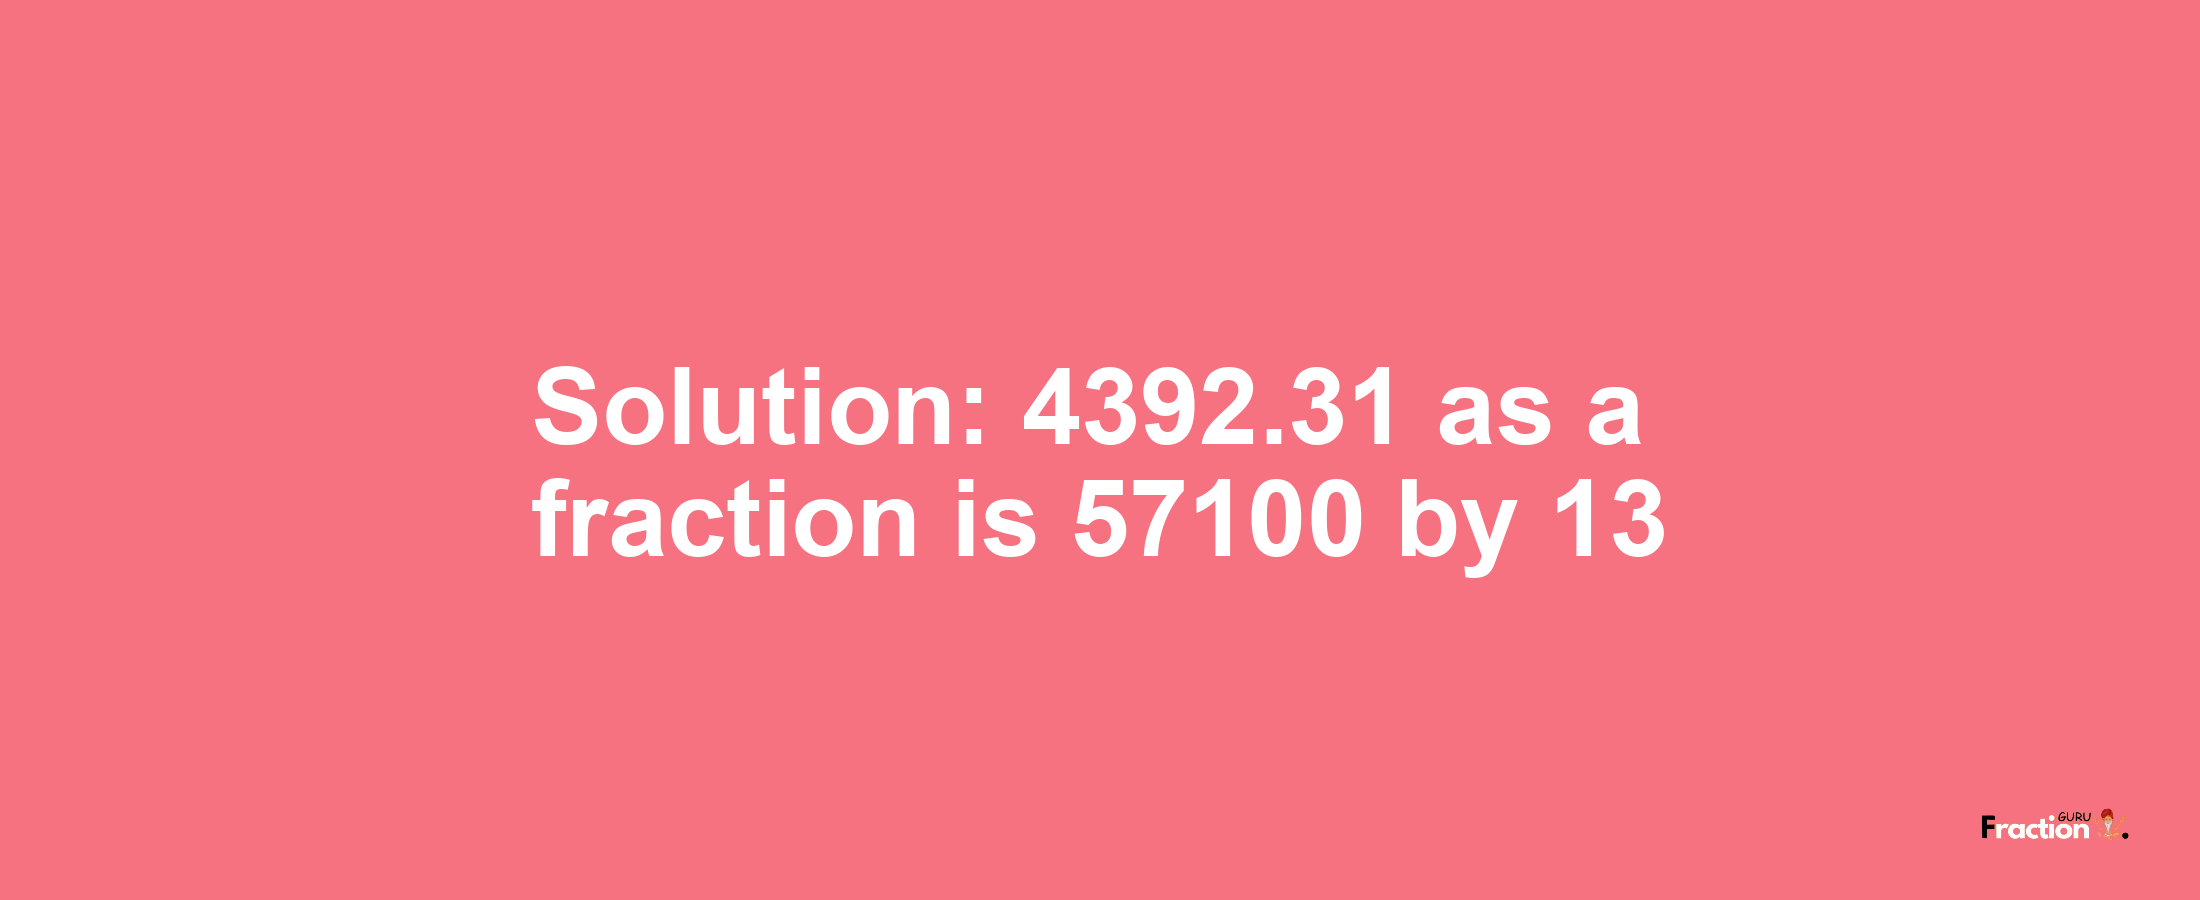 Solution:4392.31 as a fraction is 57100/13